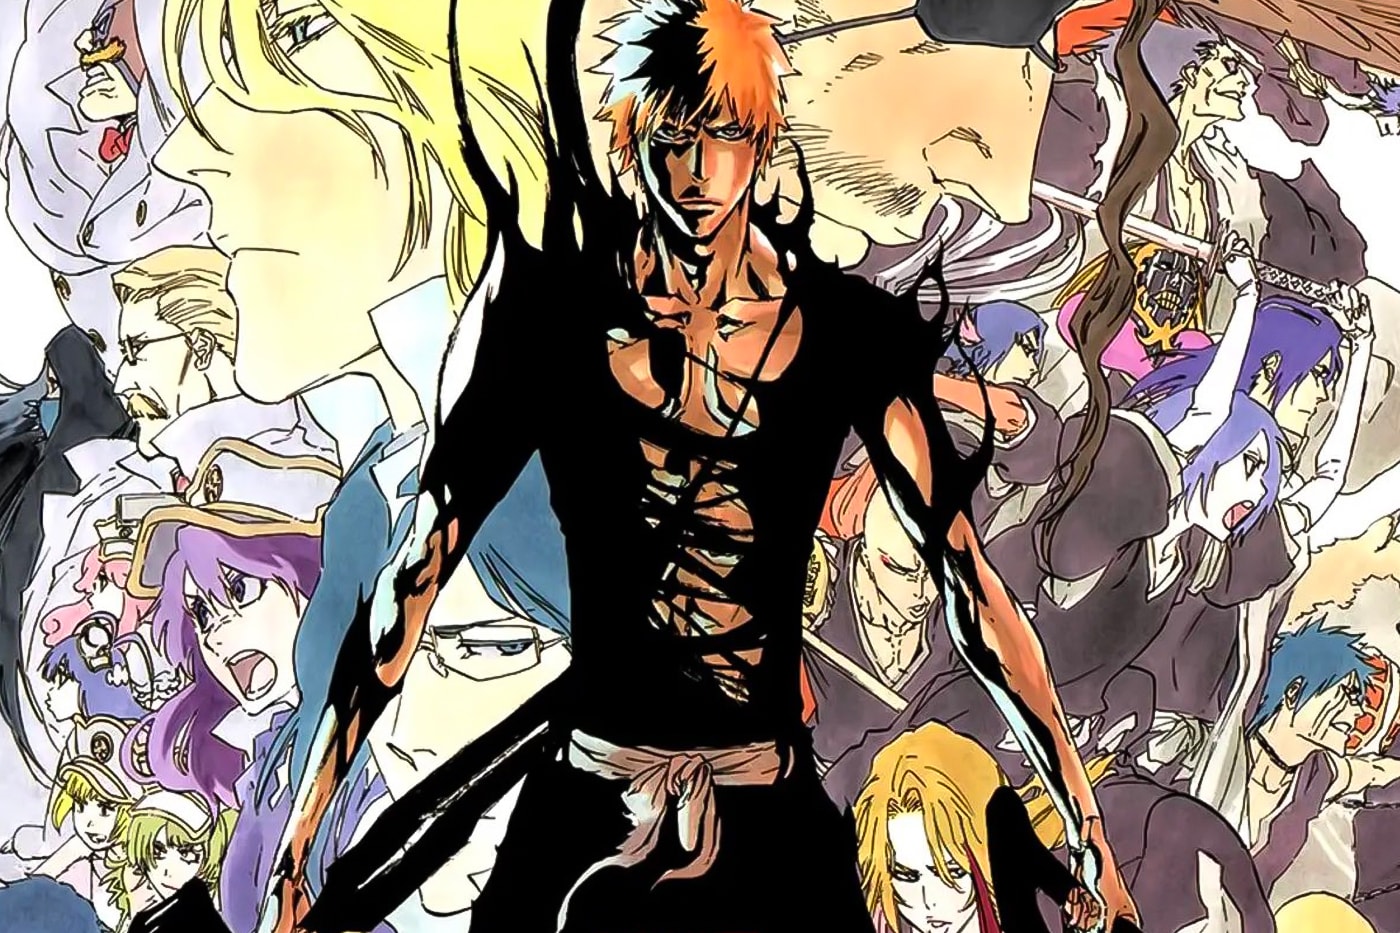 BLEACH Returns After Over 10 Years, Already Trending Online With Episode 1  Release - Anime Corner